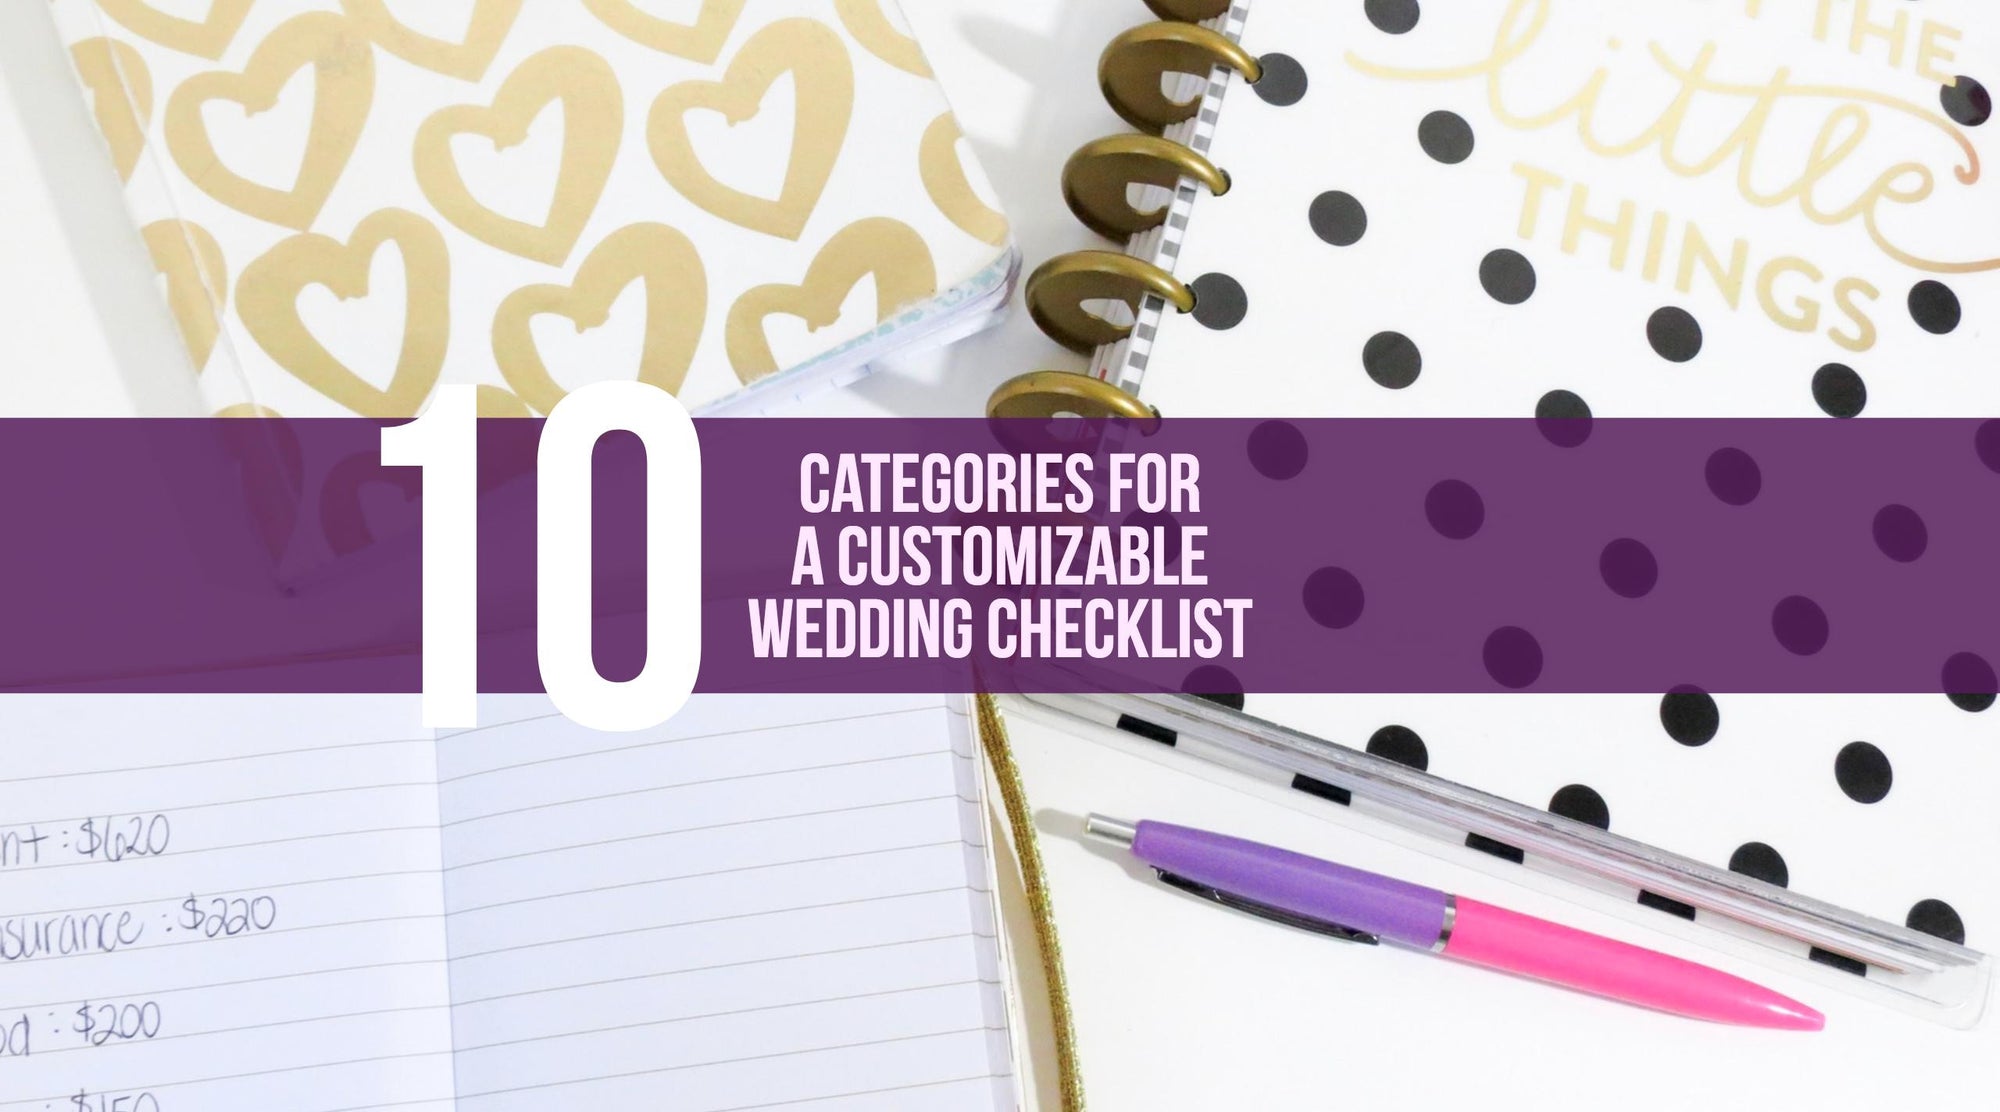 10 Categories for a Customizable Wedding Checklist